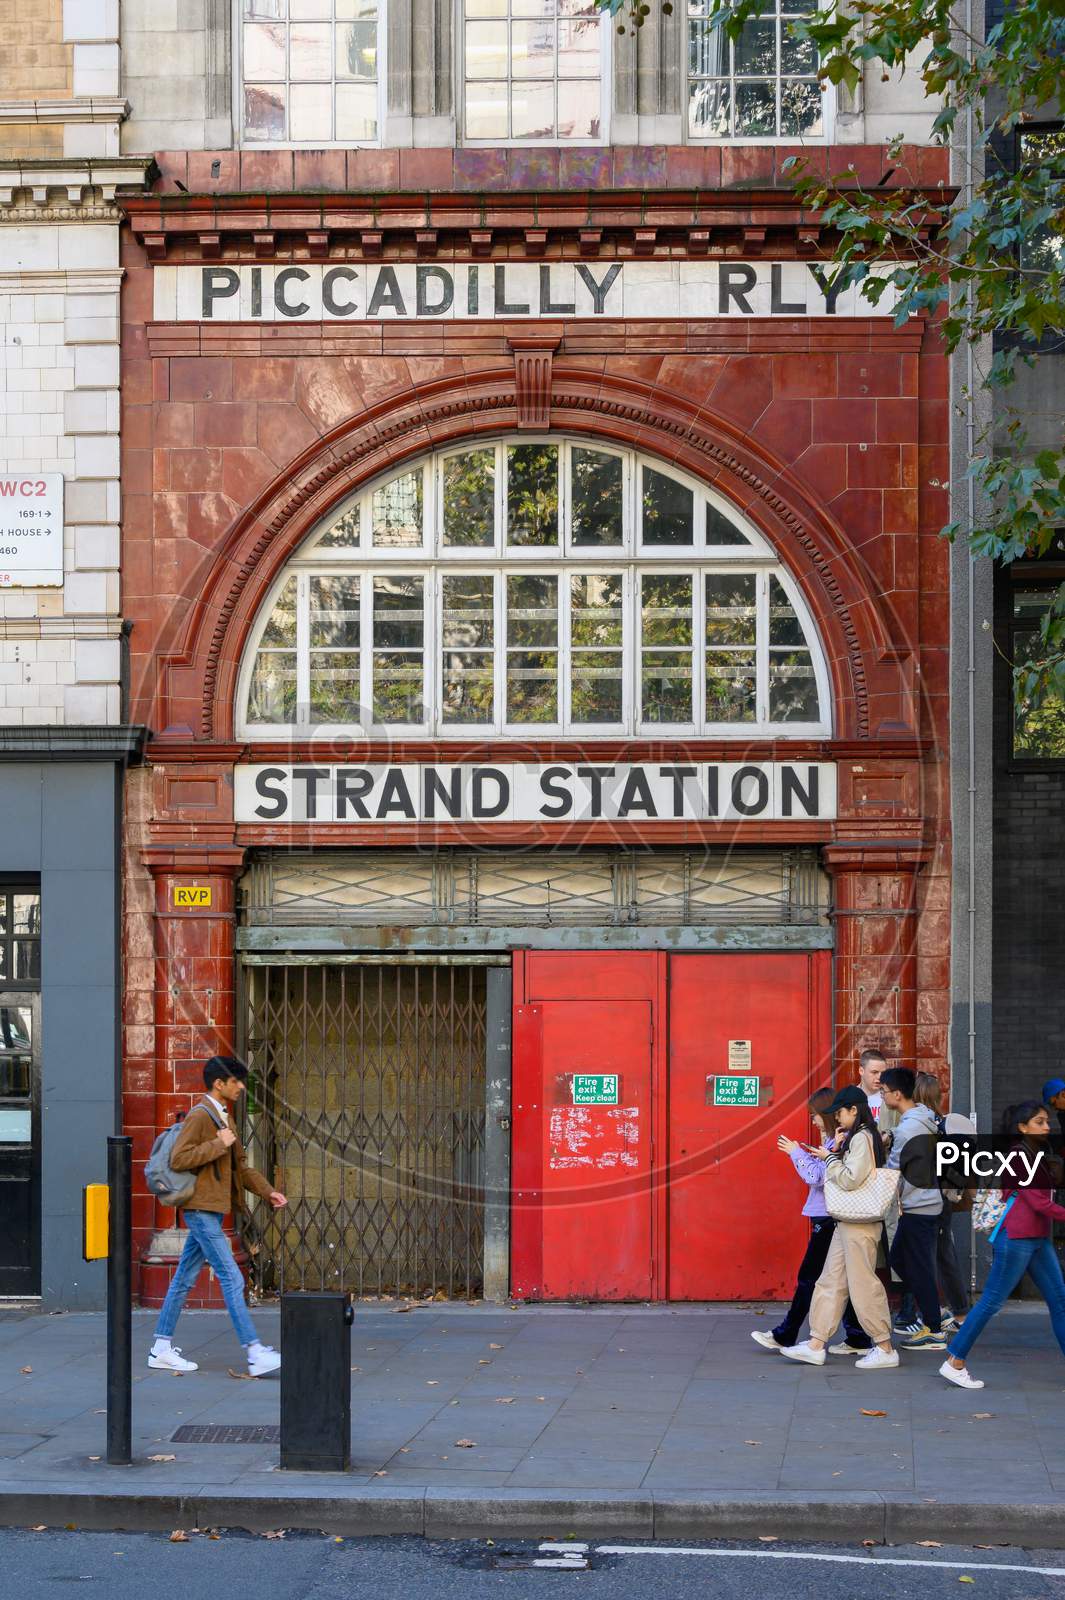 Students Passing In Front Of The Entrance To The Disused London Underground Aldwych Tube Station On The Strand